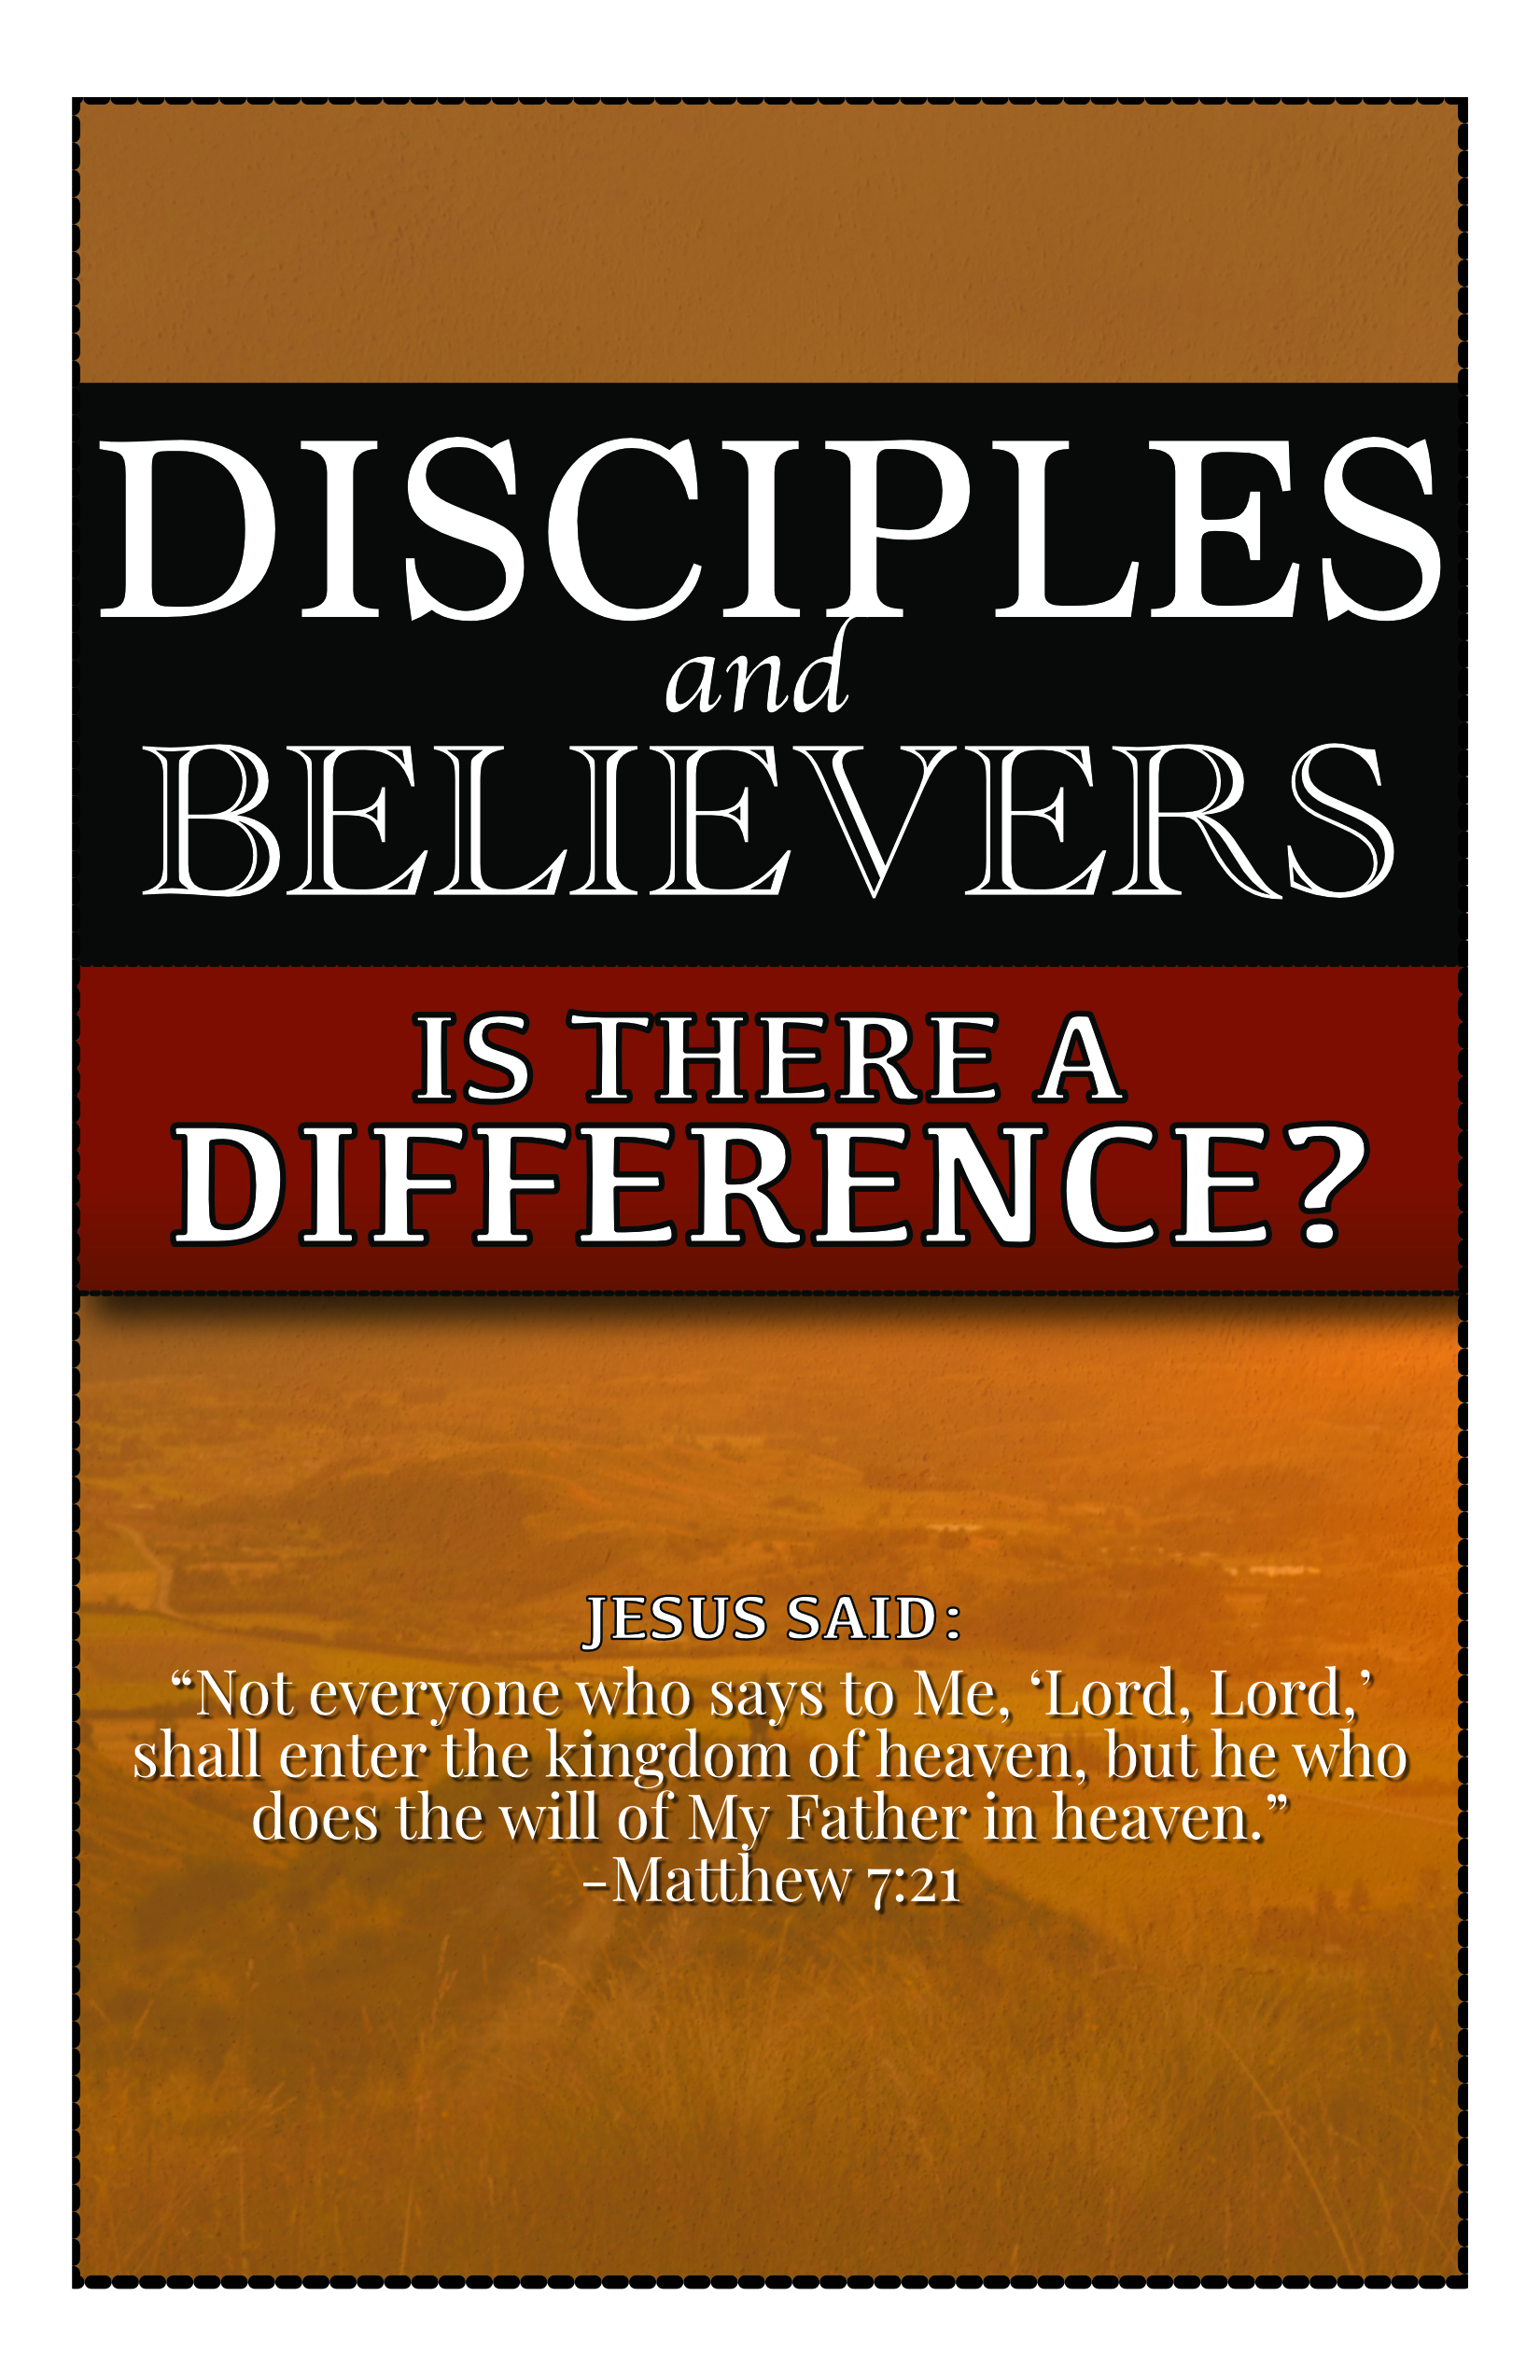 Are You a Believer or Disciple?